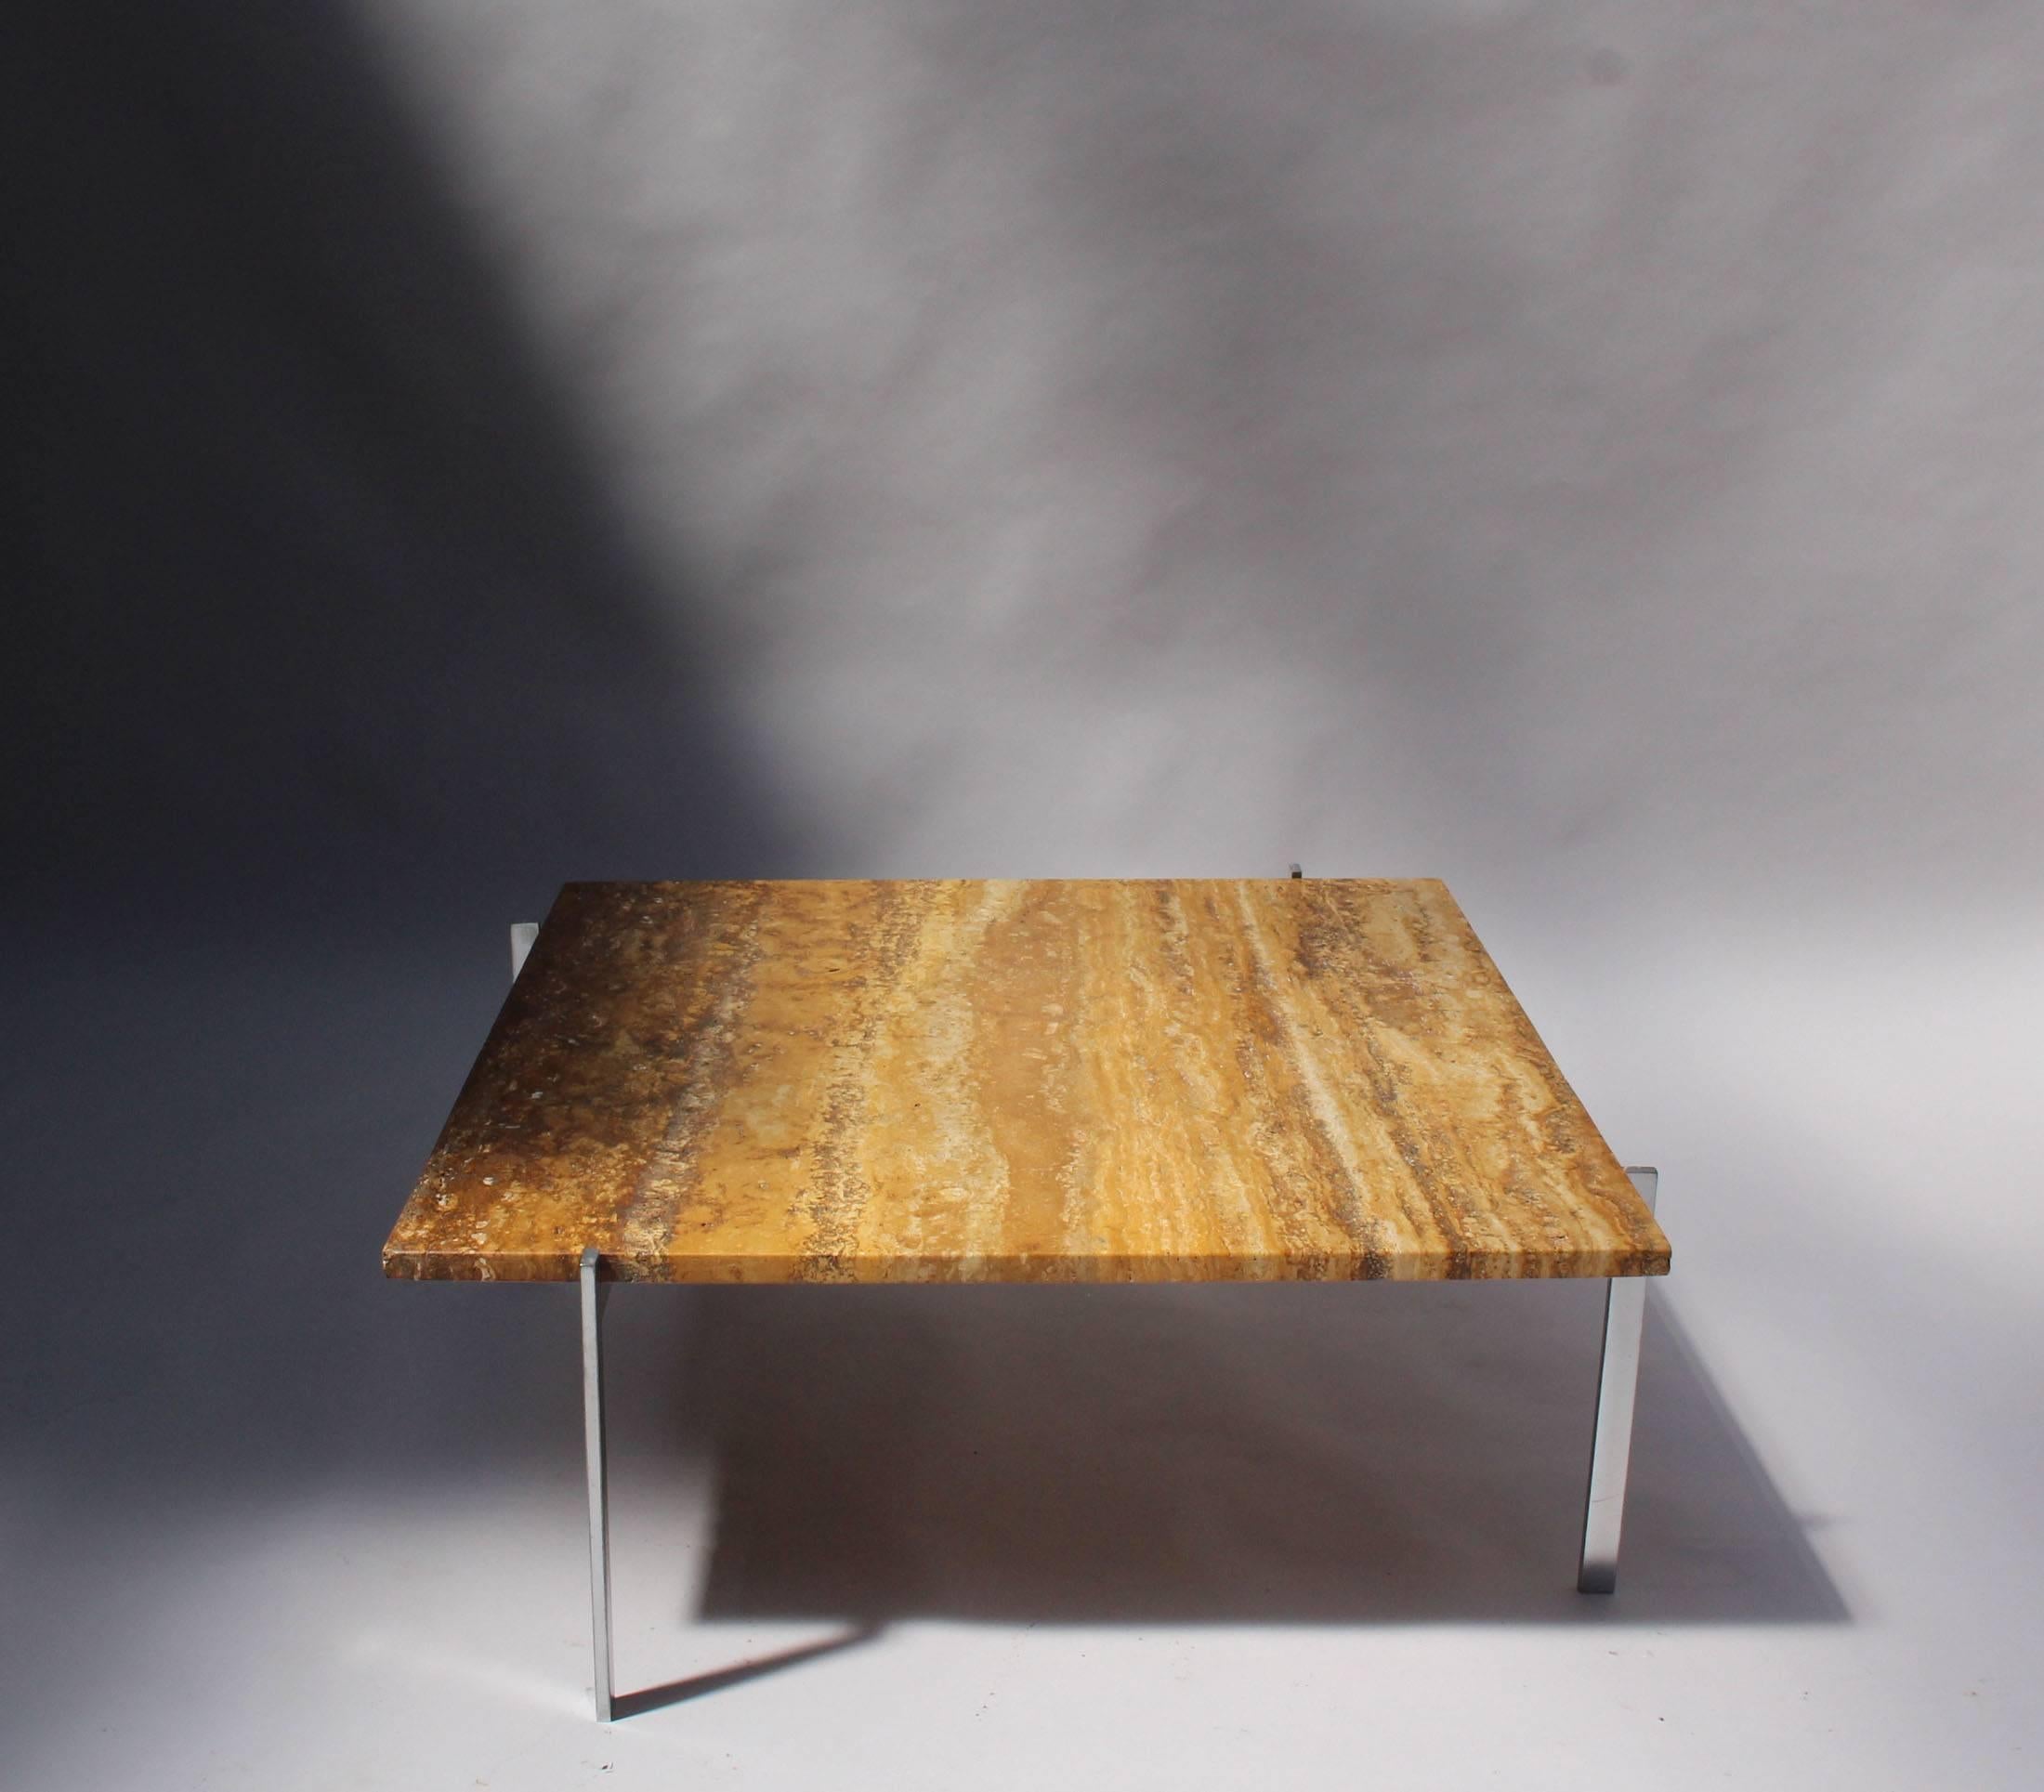 With a travertine top on a chromium-plated steel base.